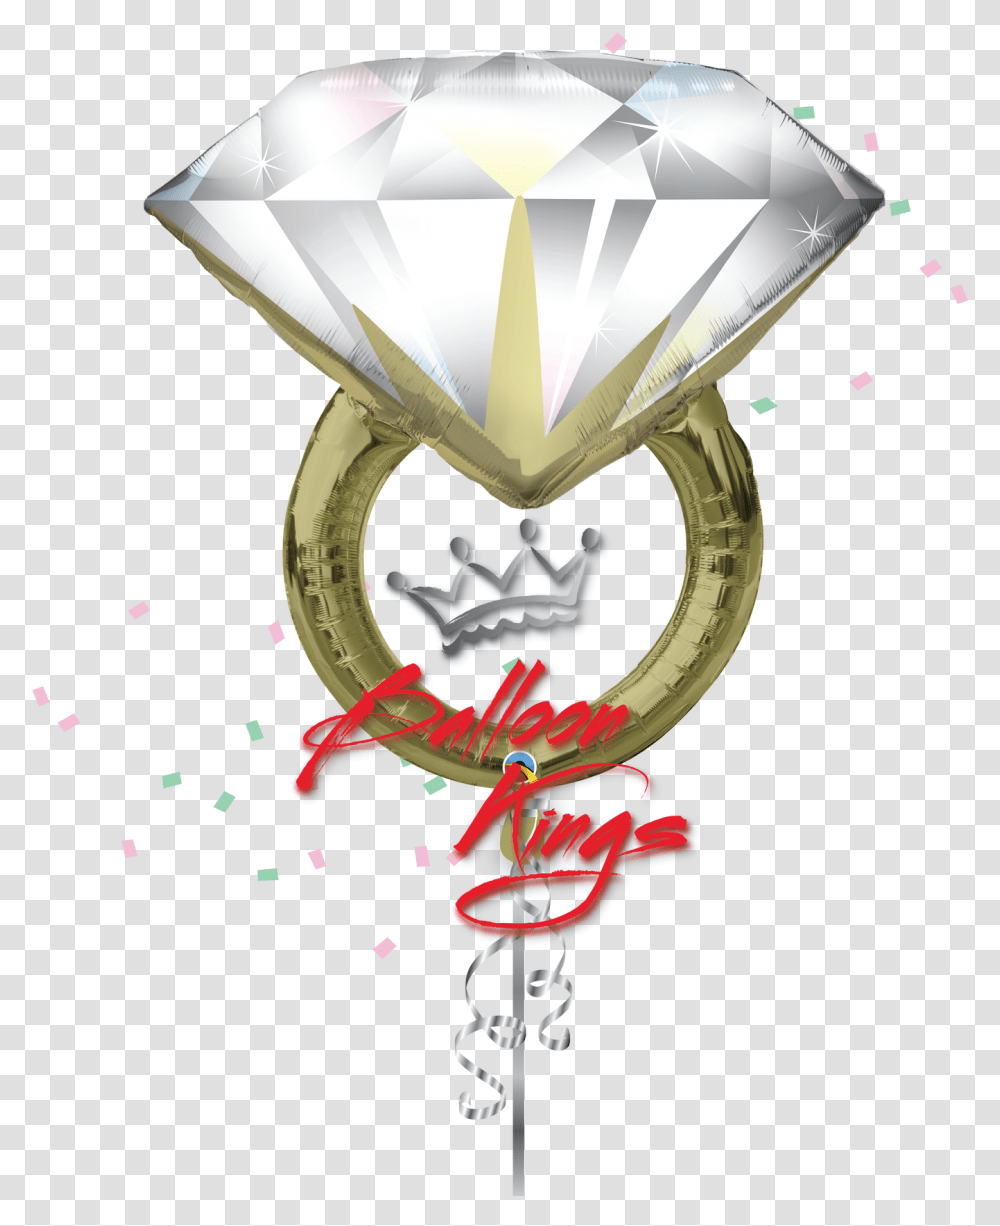 Diamond Wedding Ring Engagement Ring Balloon Bouquet, Lamp, Gemstone, Jewelry, Accessories Transparent Png